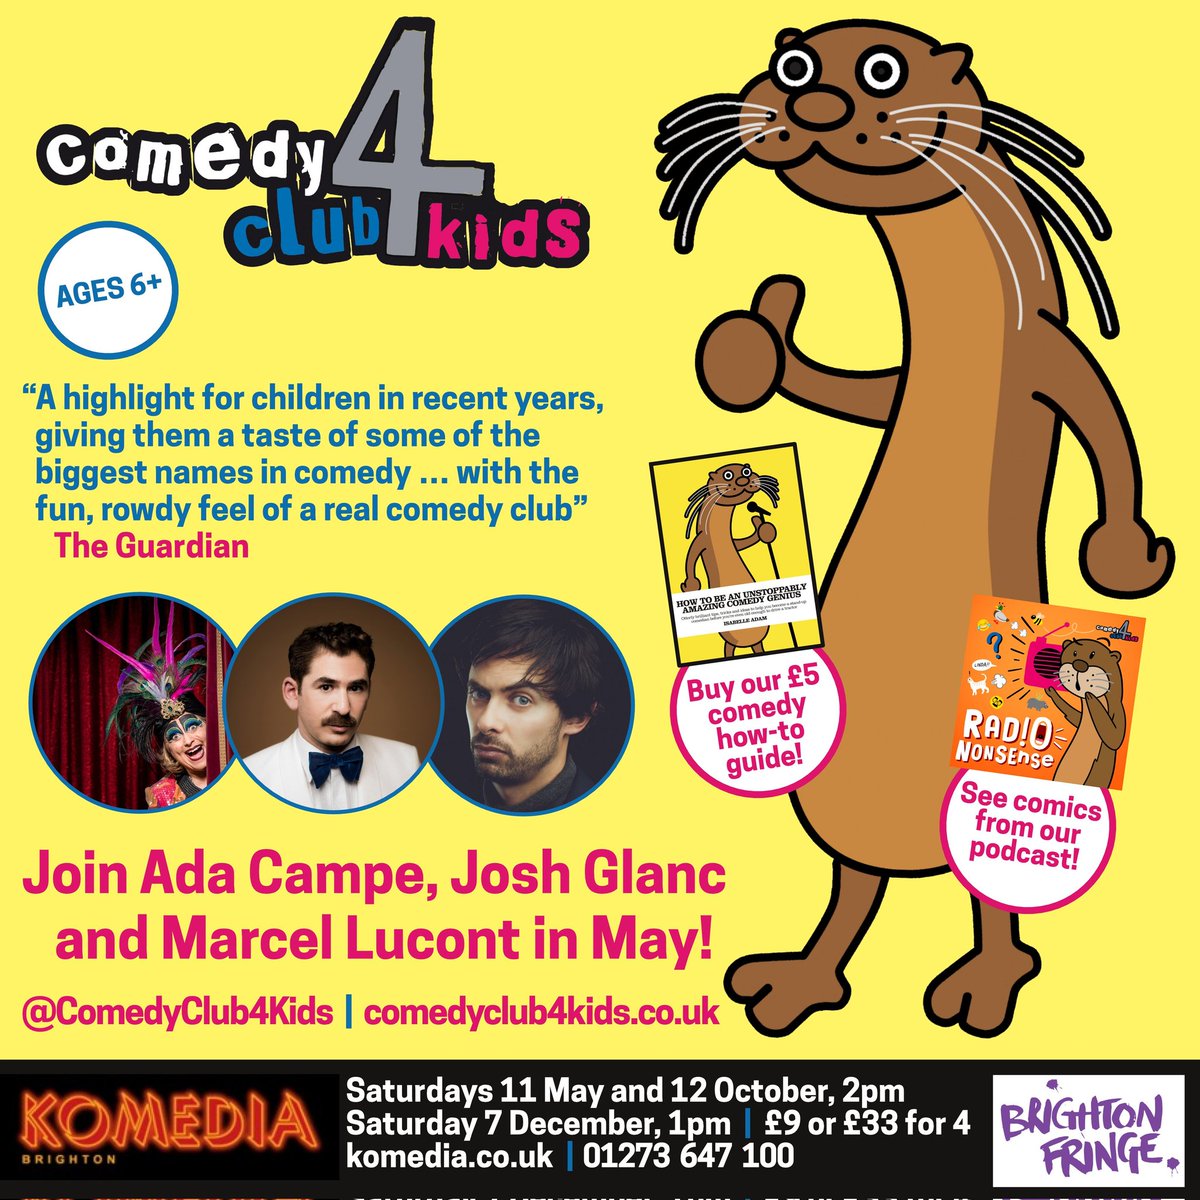 Today's @brightonfringe gig at @KomediaBrighton is SOLD OUT*, but there is a waiting list for returns, so 🤞 for anyone living in hope till 2pm. * No wonder, @AdaCampe, @JoshGlanc and @MarcelLucont is QUITE the line-up!